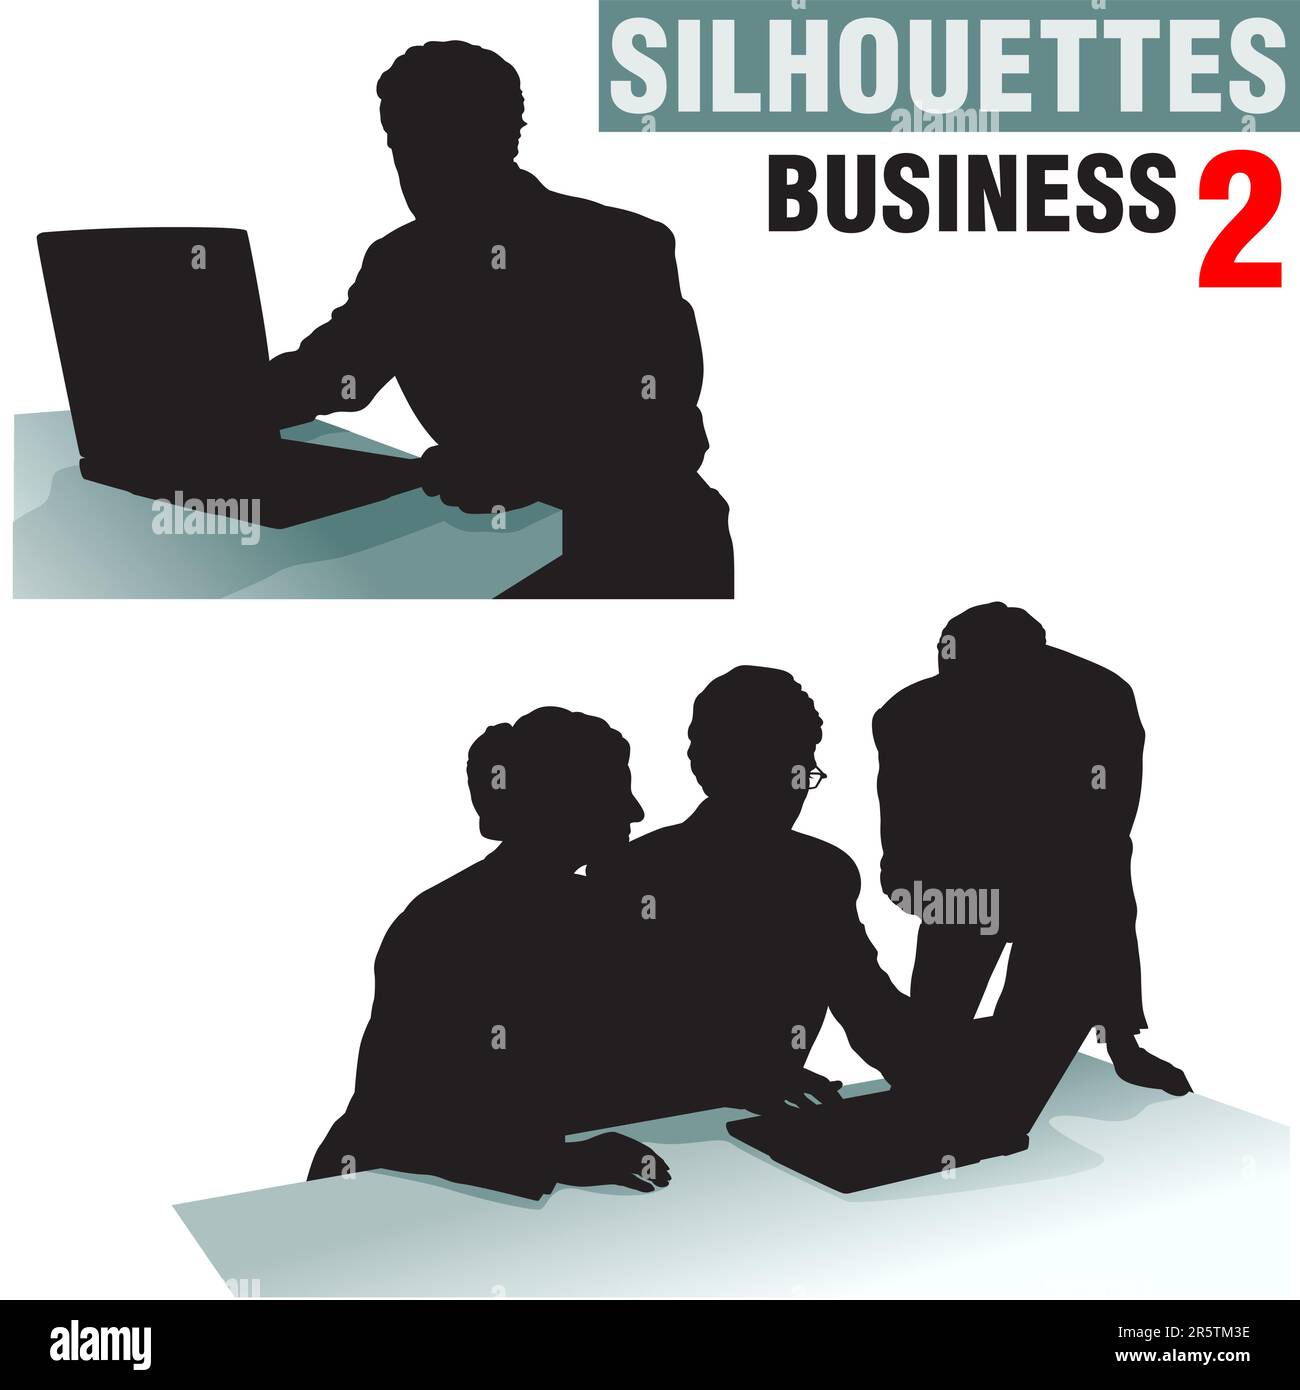 Silhouettes - Business 2 - high detailed black and white illustrations. Stock Vector